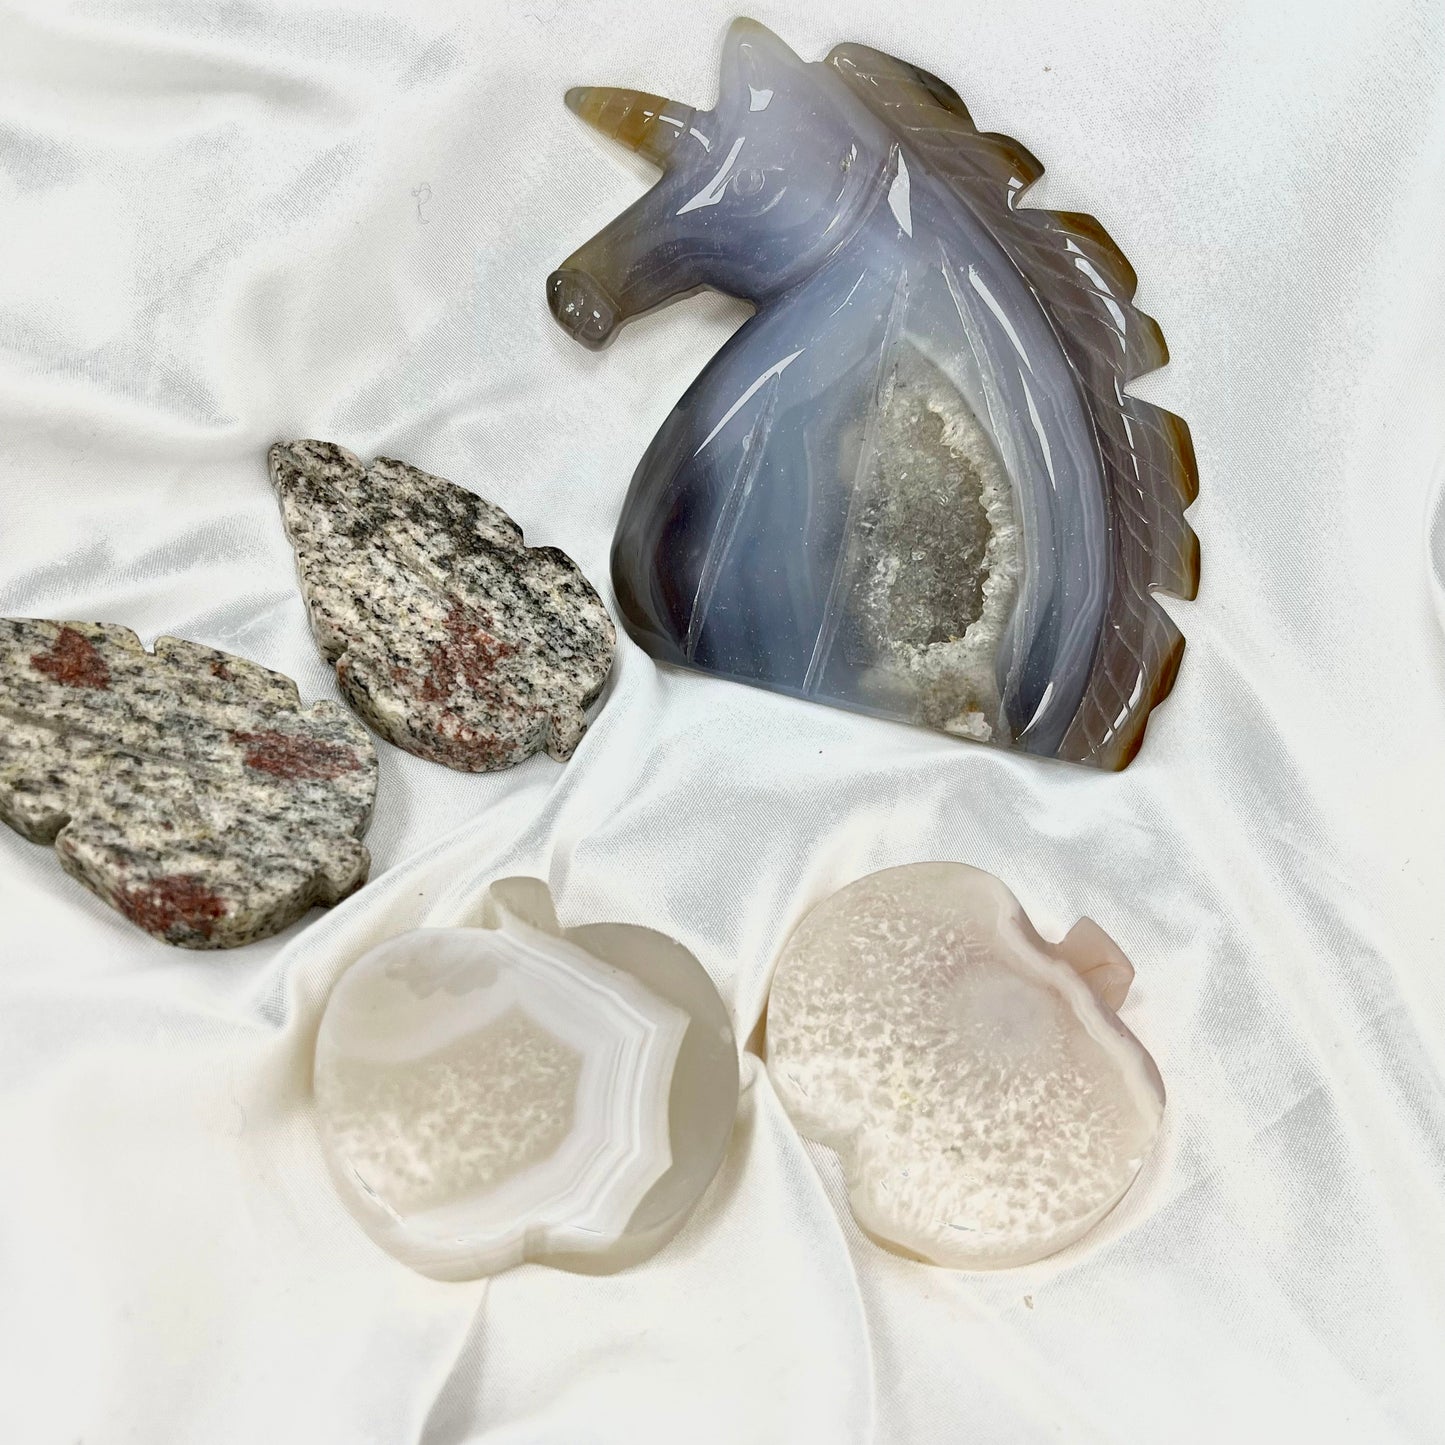 【A21】Druzy Agate Crystal Set Unicron Design Carving With 2 Flower Agate Apple 2 Sesame Stone Leaf